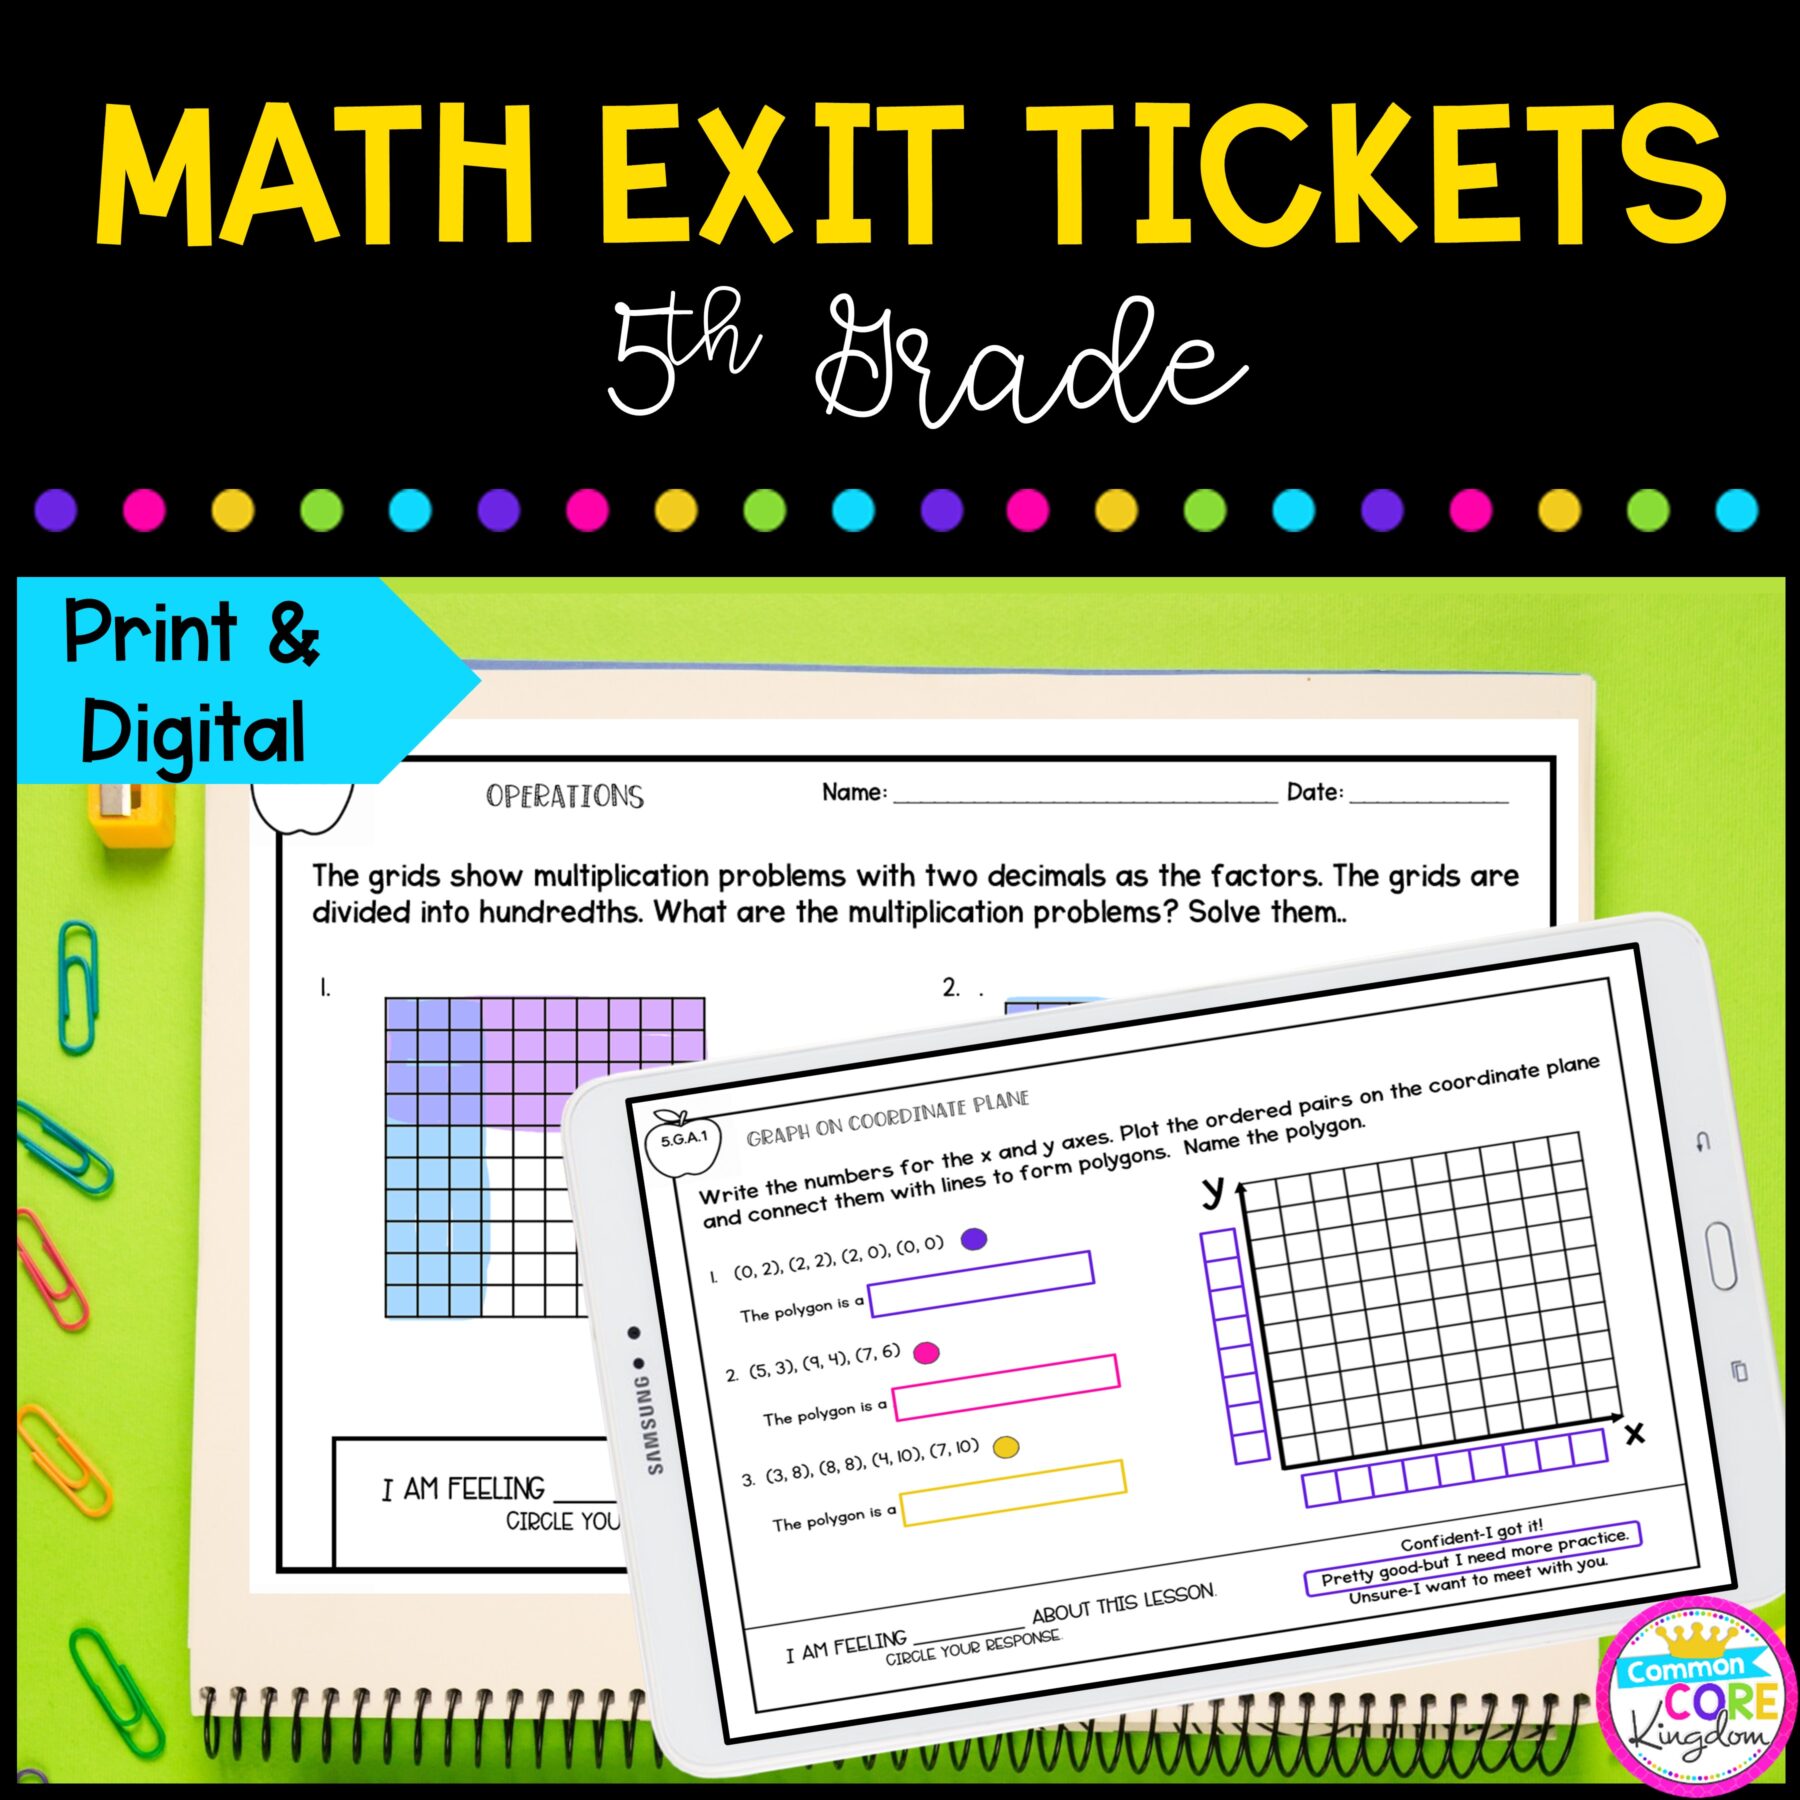 5th Grade Math Exit Tickets in Google Slides and Printable Format